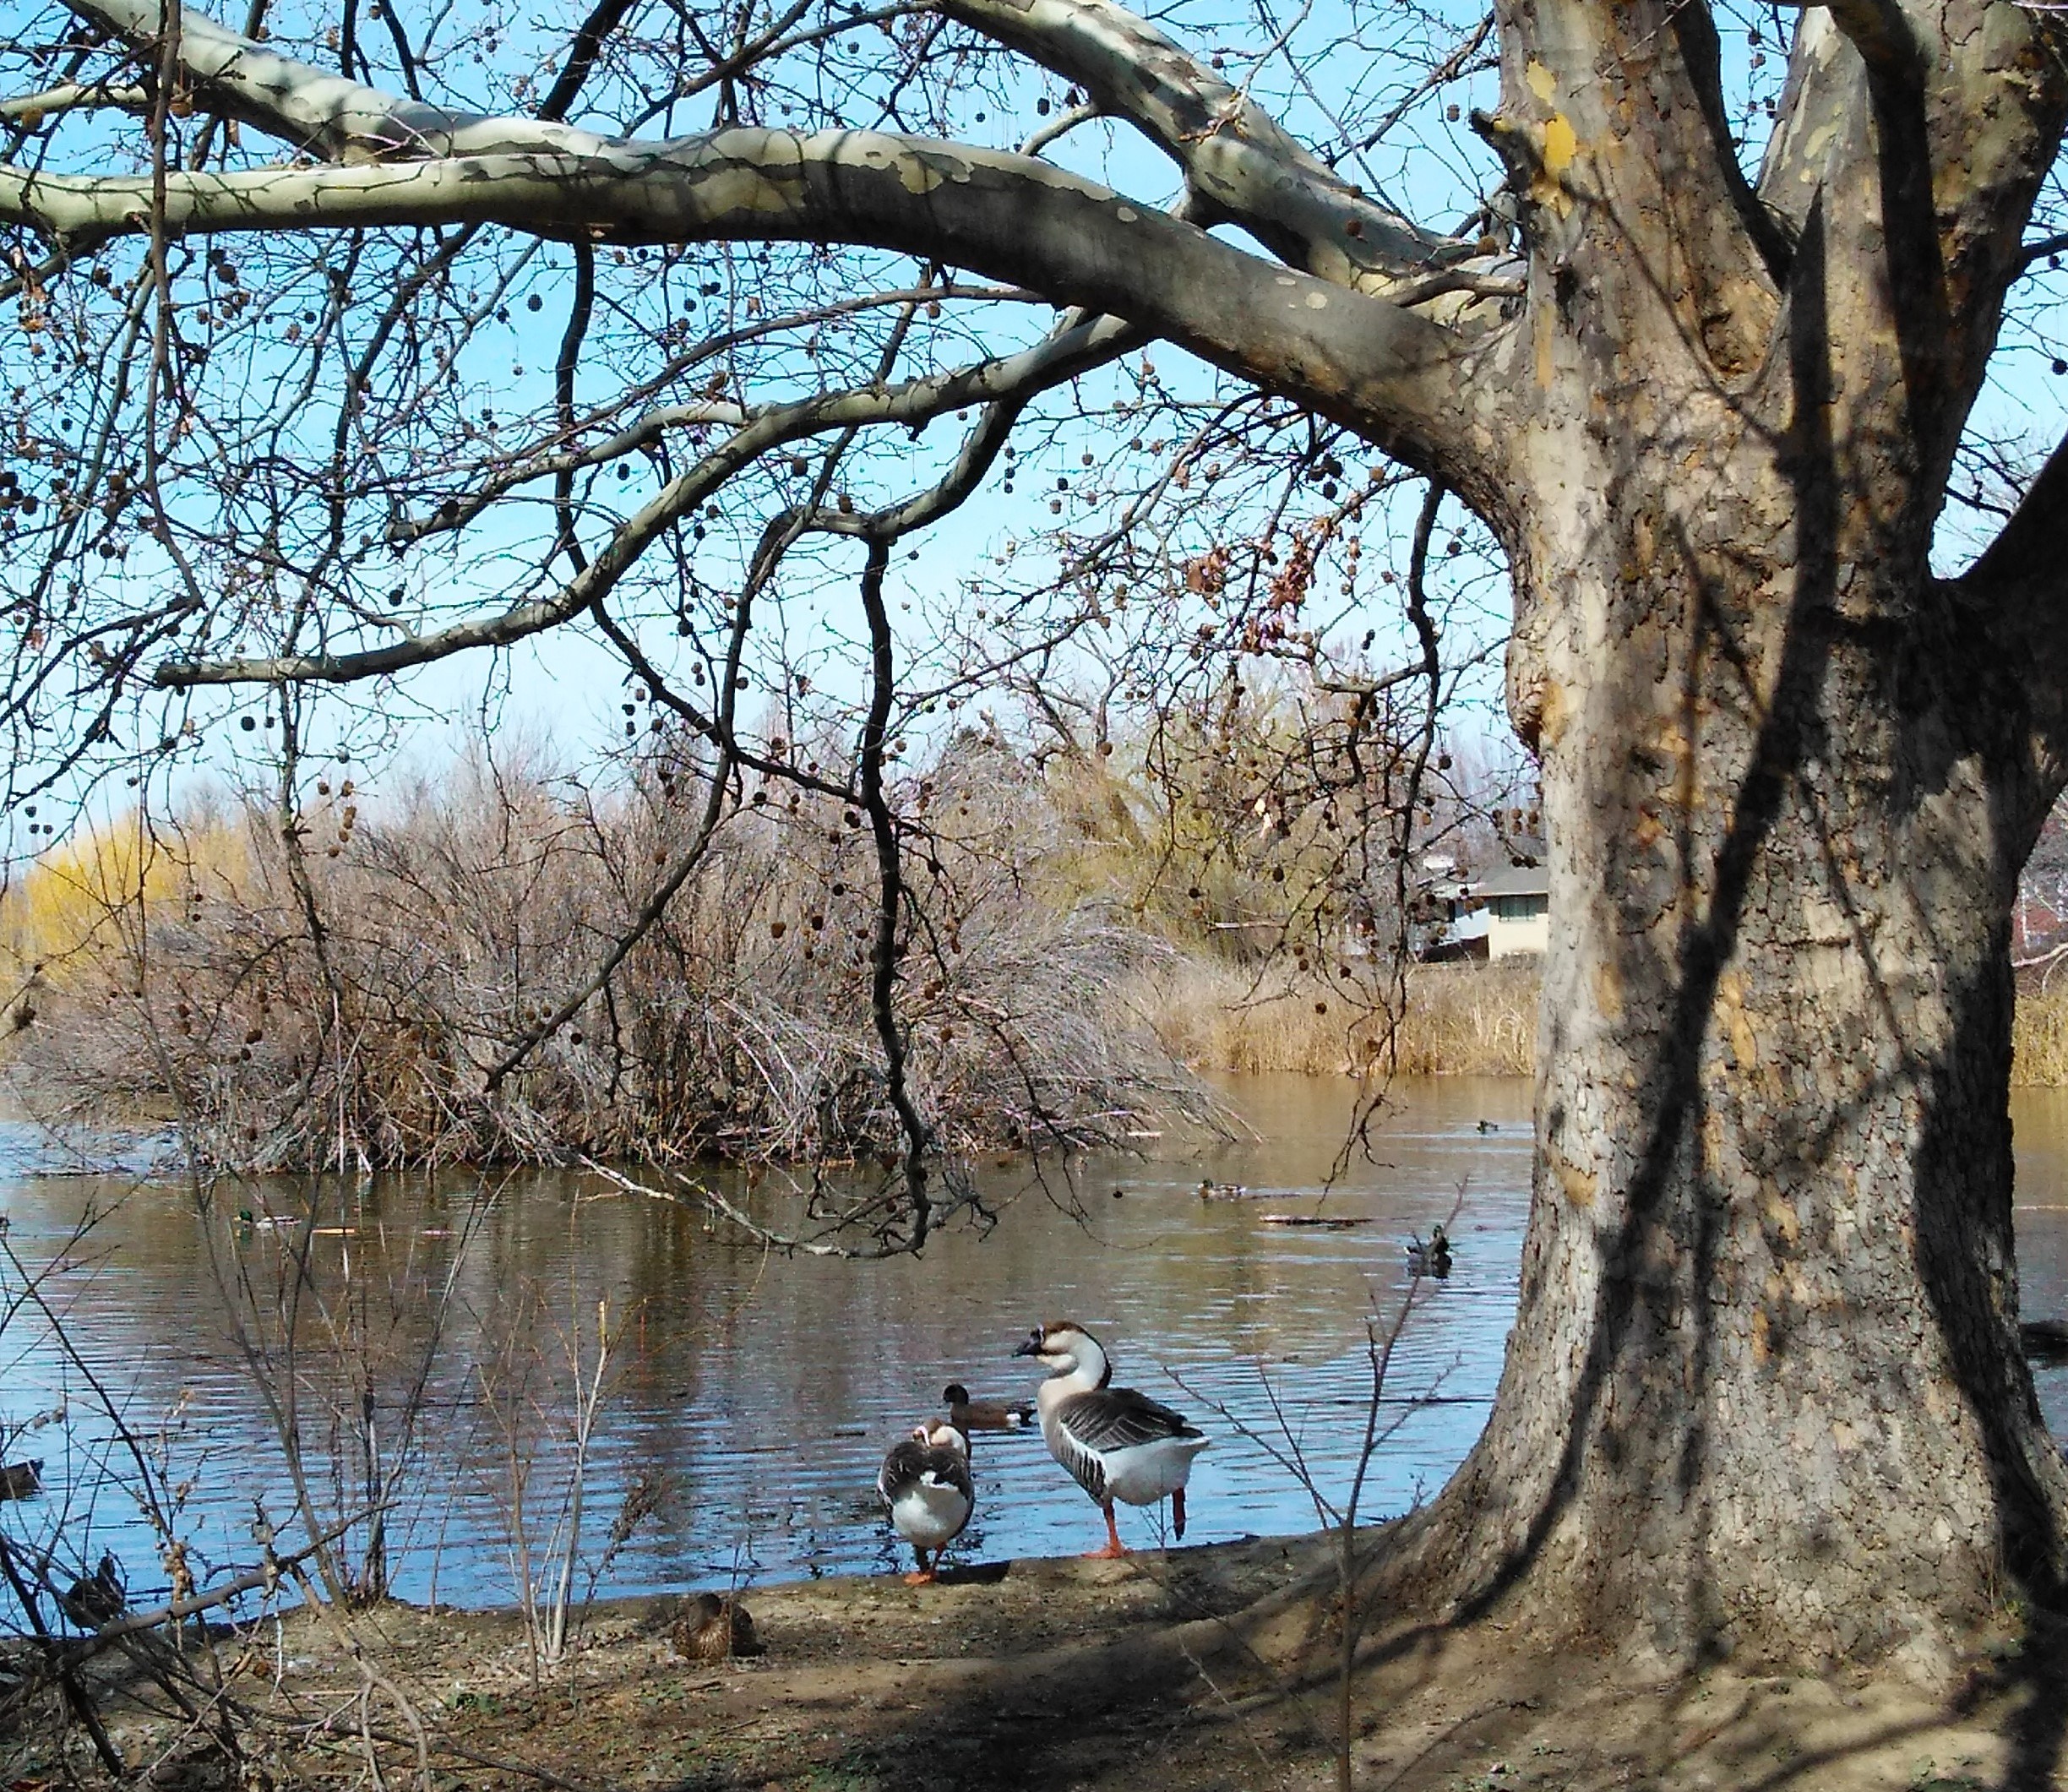 Two geese and several duck rest on the shoreline of a pond where a large tree provides a canopy to the right